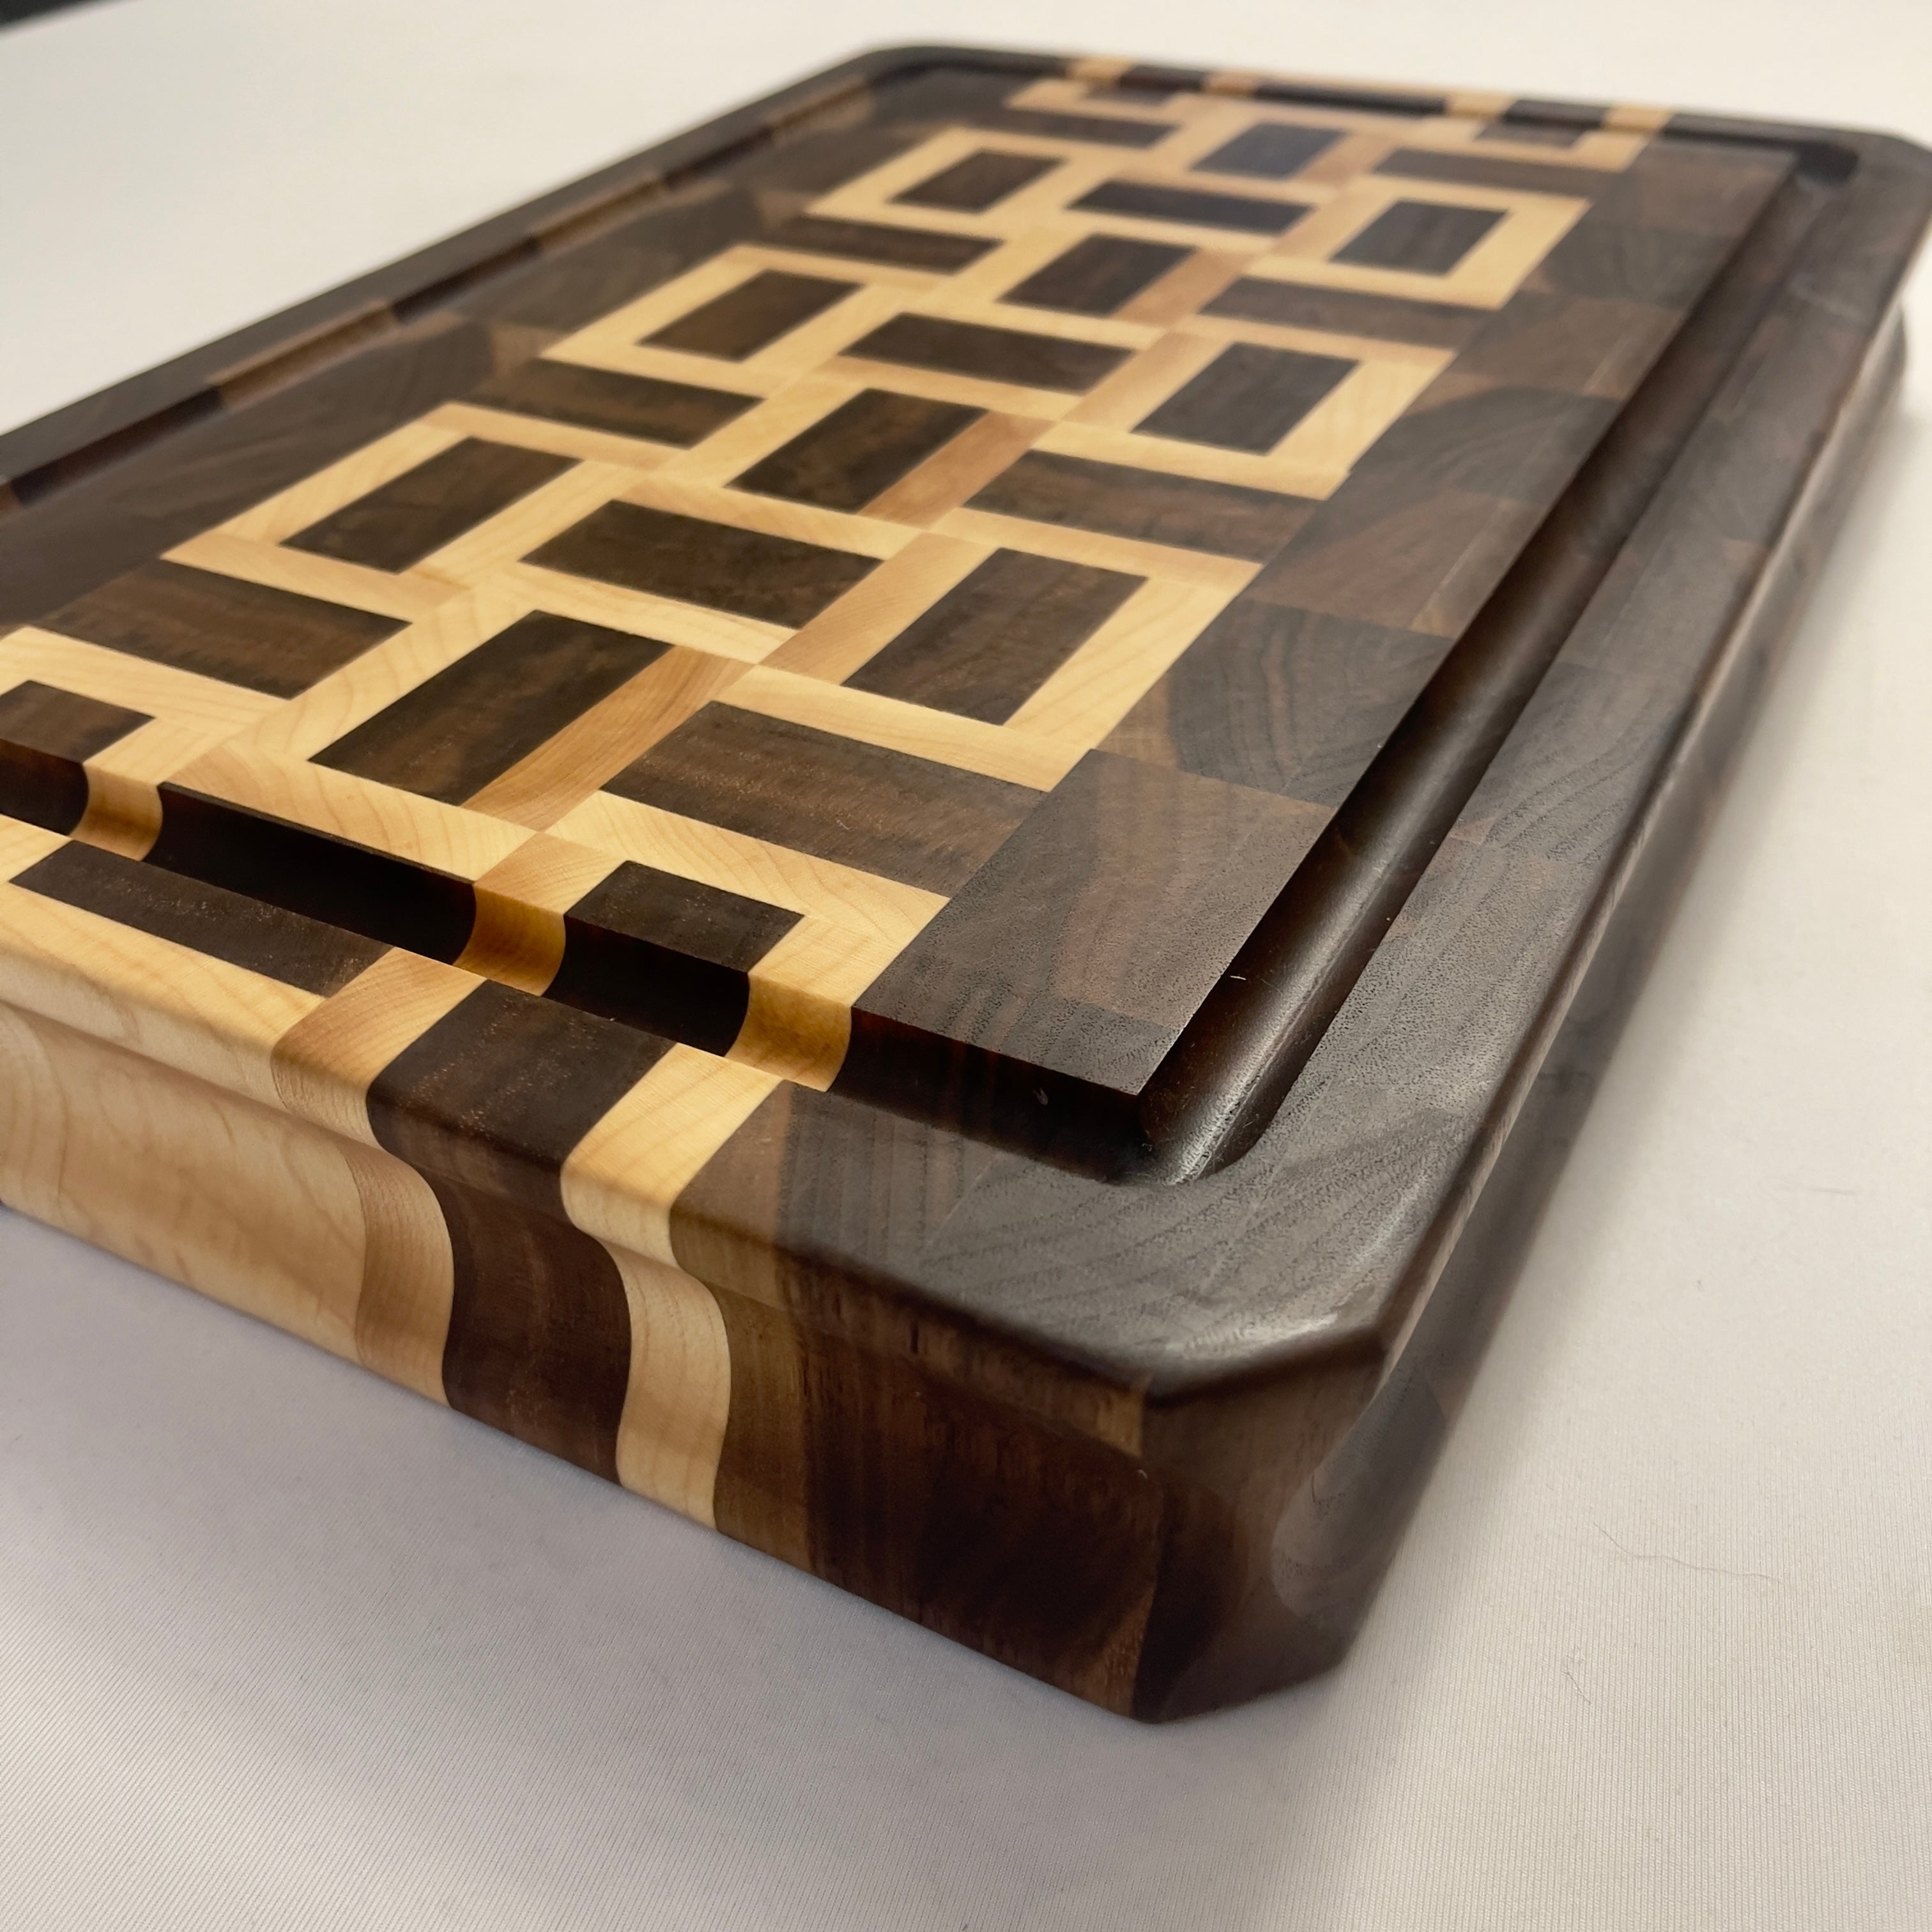 End Grain Collection - We have the wood